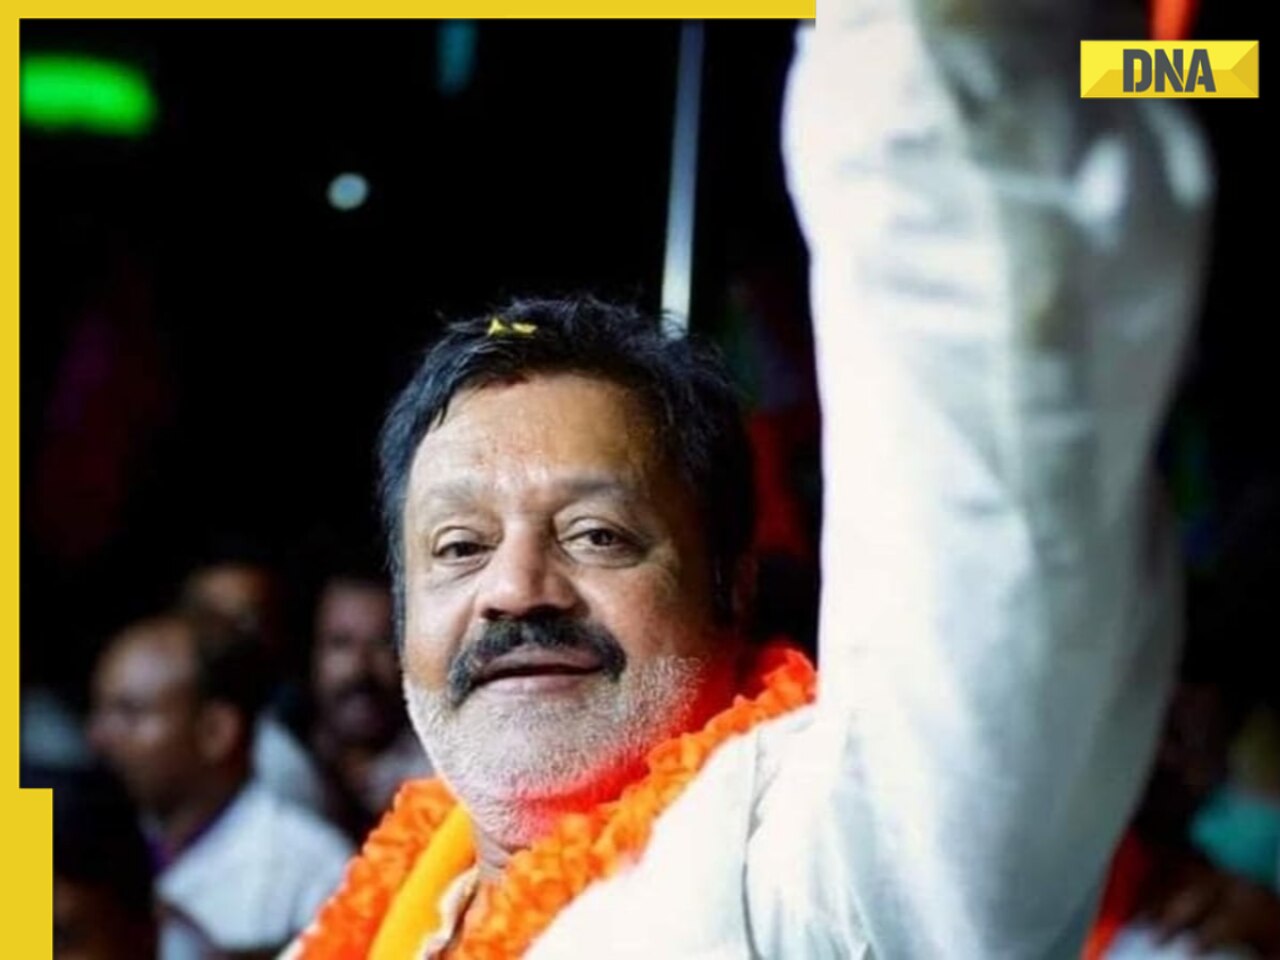 Celebrations begin at actor Suresh Gopi's home as BJP candidate takes handsome lead in Thrissur